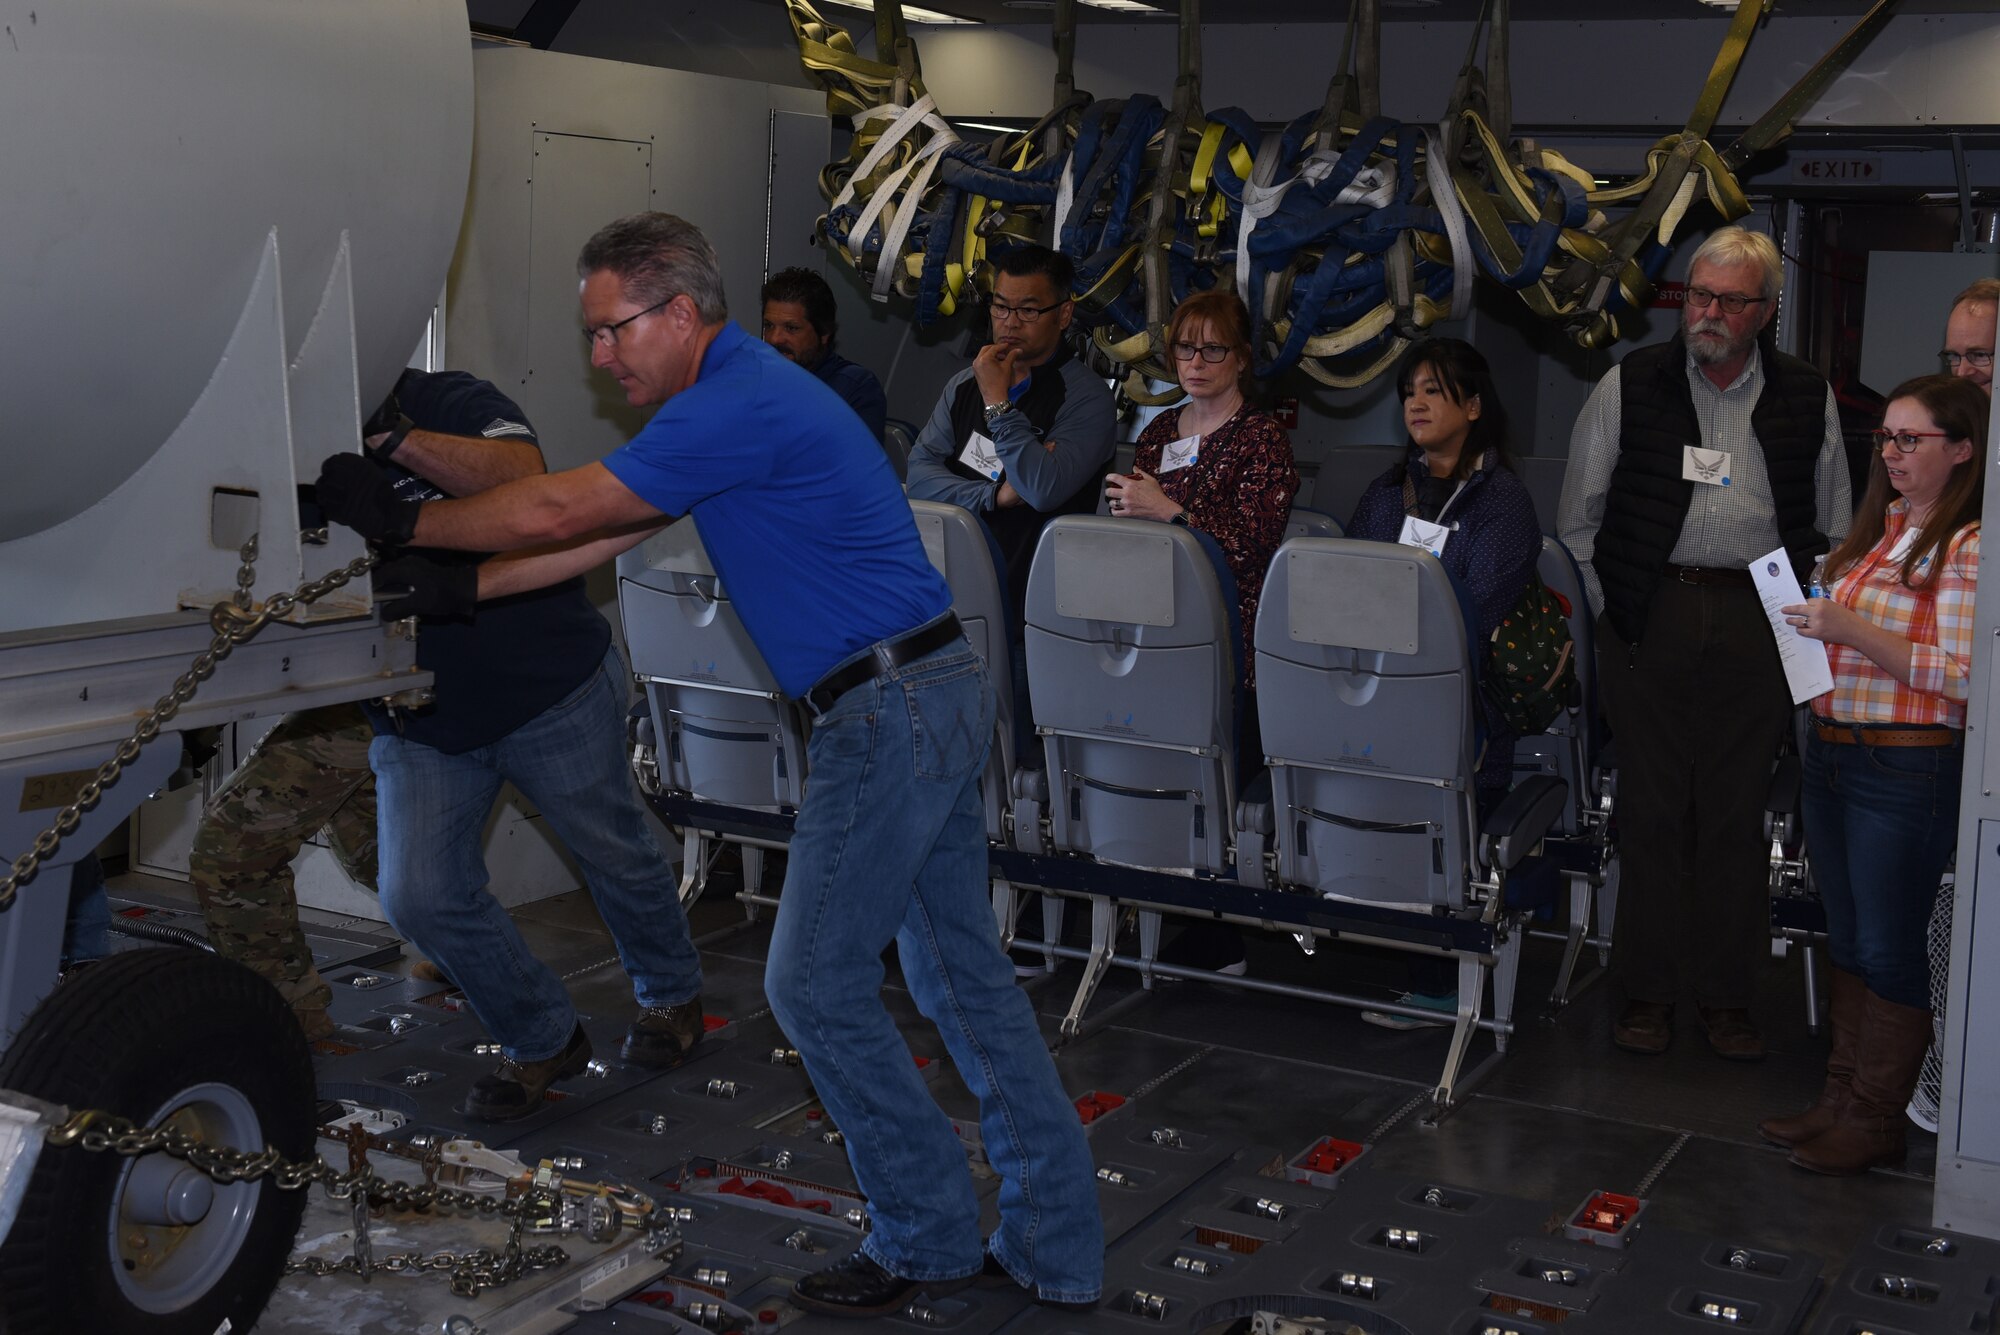 Honorary Commanders watch as Flight Safety Services Corporation members simulate loading cargo on a KC-10 Extender June 7, 2019, at Travis Air Force Base, California. The purpose of the Travis’ Honorary Commander Program is to promote relationships between base senior leadership and civilian partners, foster civic appreciation of the Air Force mission and its Airmen, maximize opportunities to share the Air Force story with new stewards and to communicate mutual interest, challenges and concerns that senior leaders and civilian stakeholders have in common. (U.S. Air Force photo by Airman 1st Class Cameron Otte)